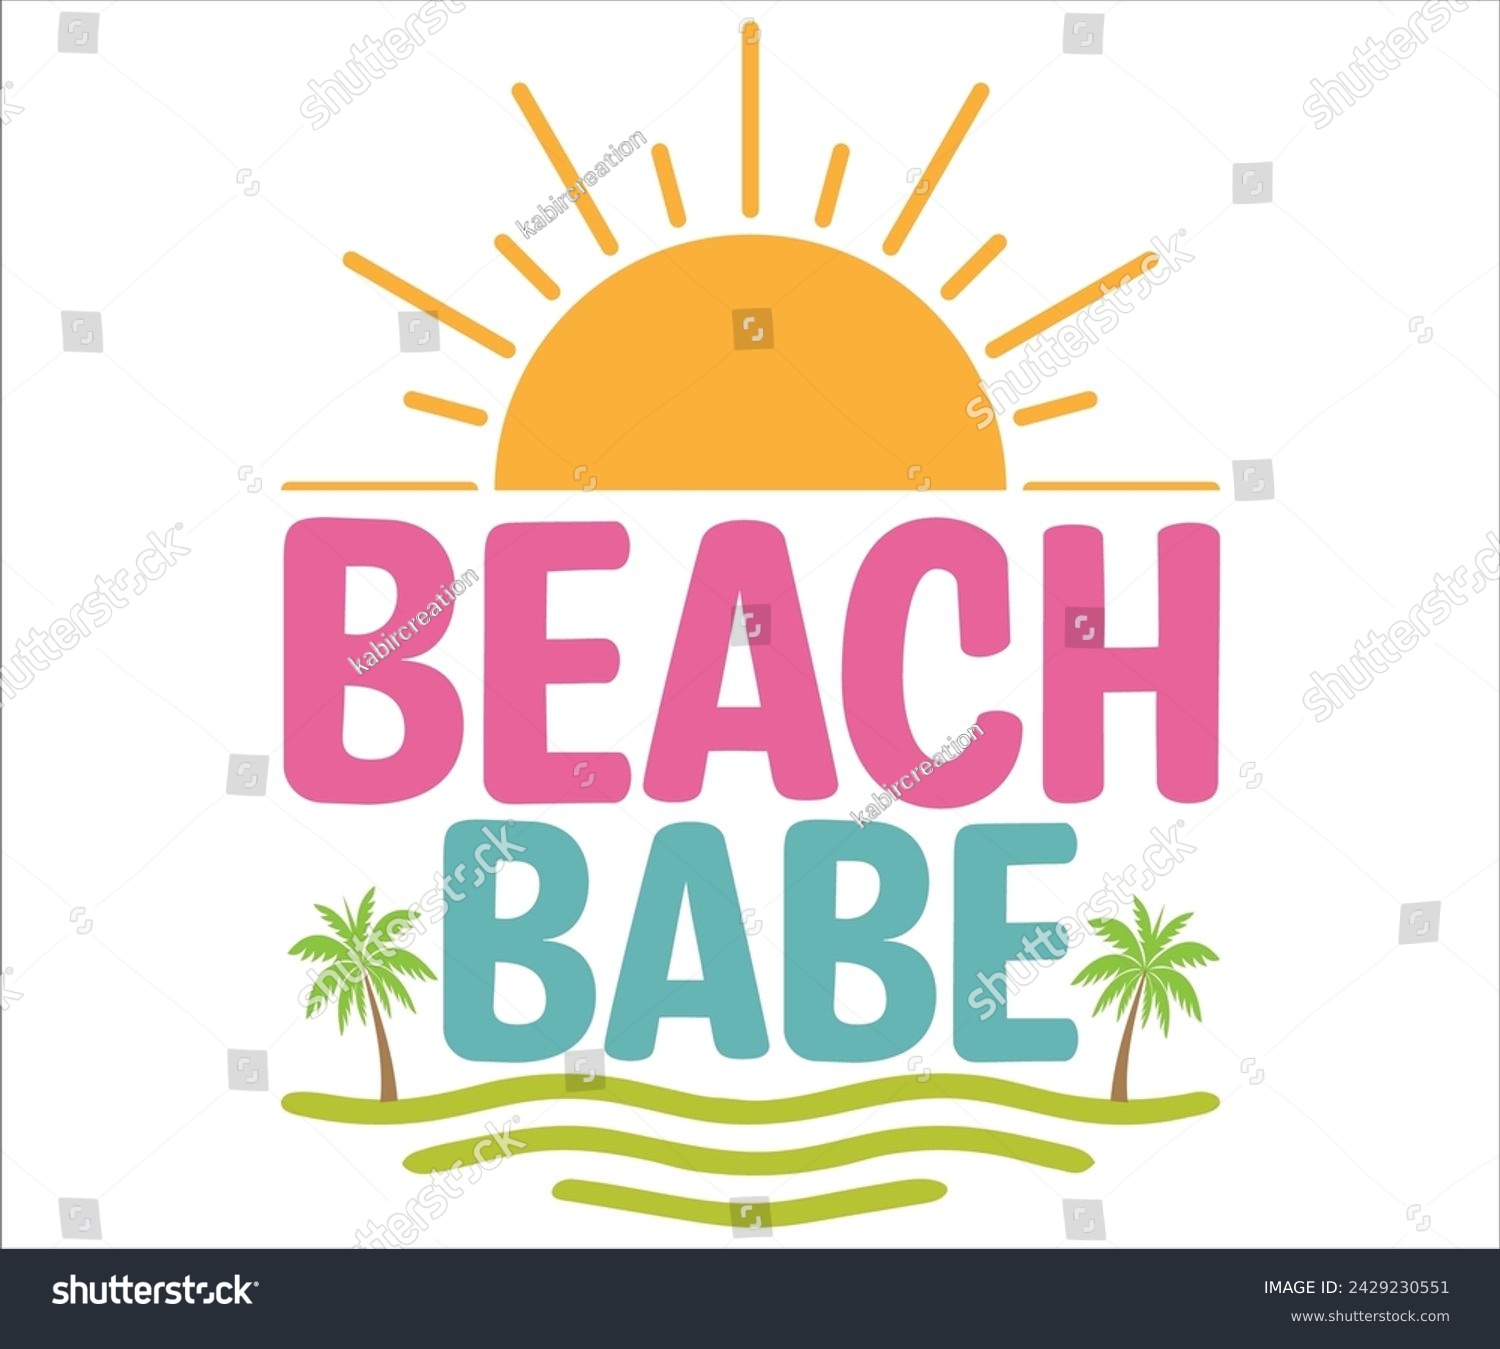 SVG of Beach Babe T-shirt, Happy Summer Day T-shirt, Happy Summer Day svg,Hello Summer Svg,summer Beach Vibes Shirt, Vacation, Cut File for Cricut svg